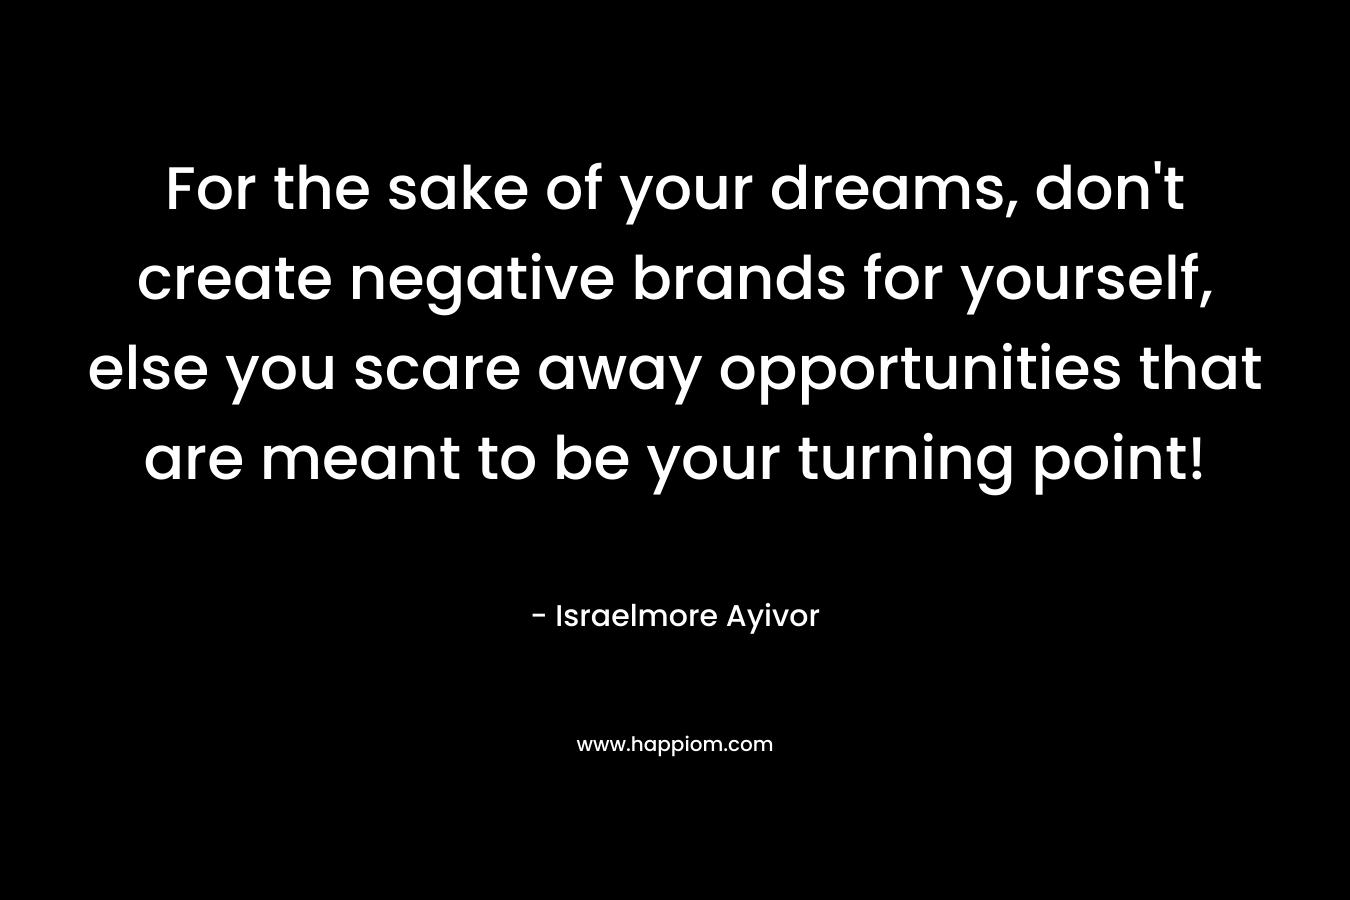 For the sake of your dreams, don’t create negative brands for yourself, else you scare away opportunities that are meant to be your turning point! – Israelmore Ayivor